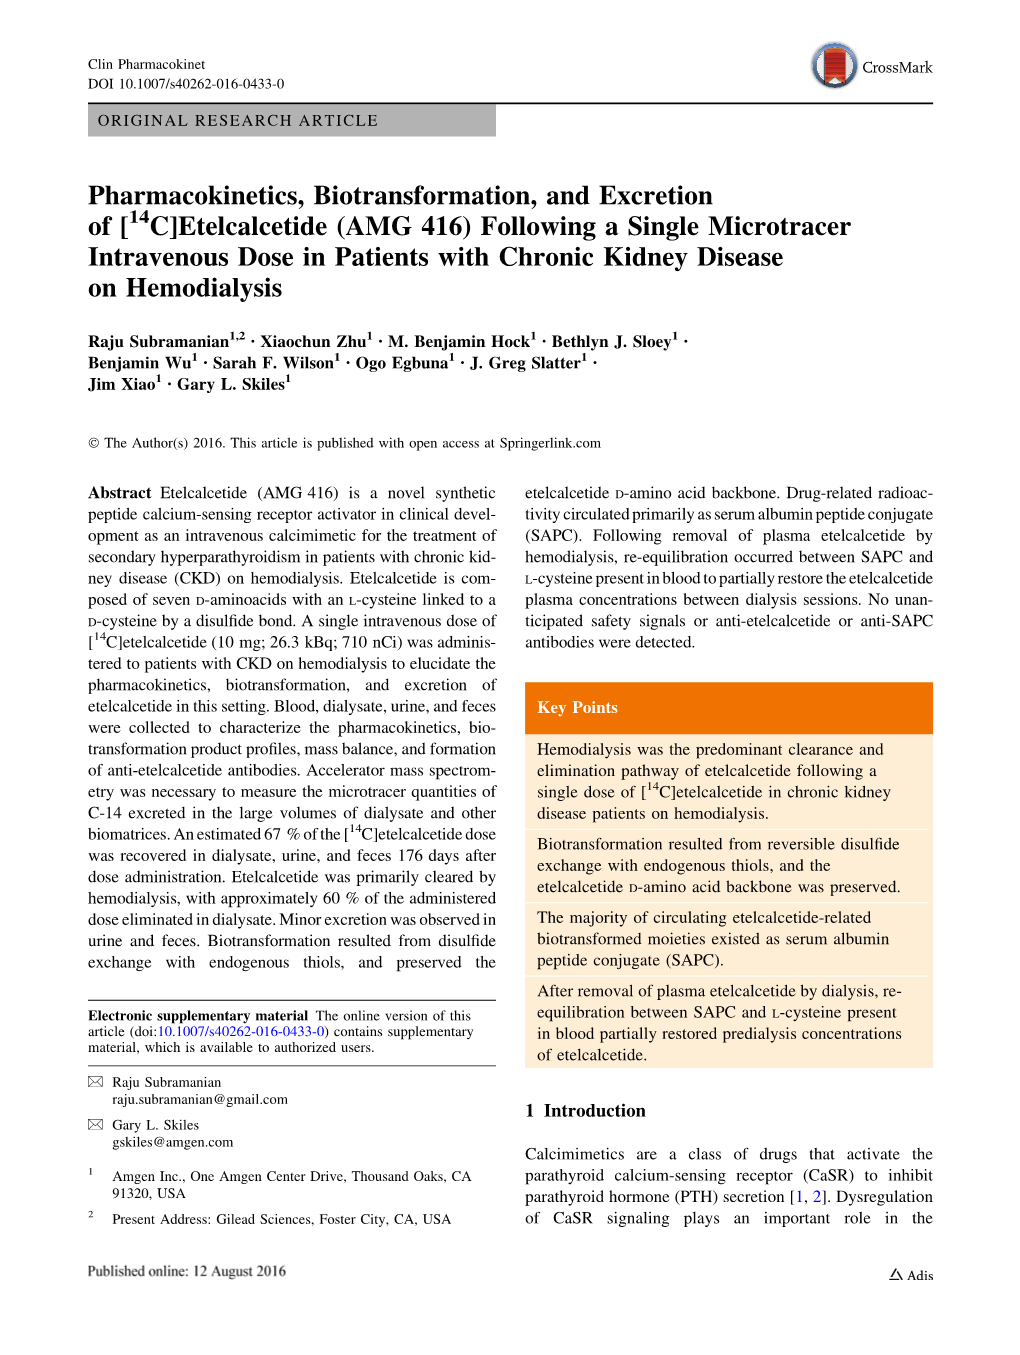 Pharmacokinetics, Biotransformation, and Excretion of [14C]Etelcalcetide